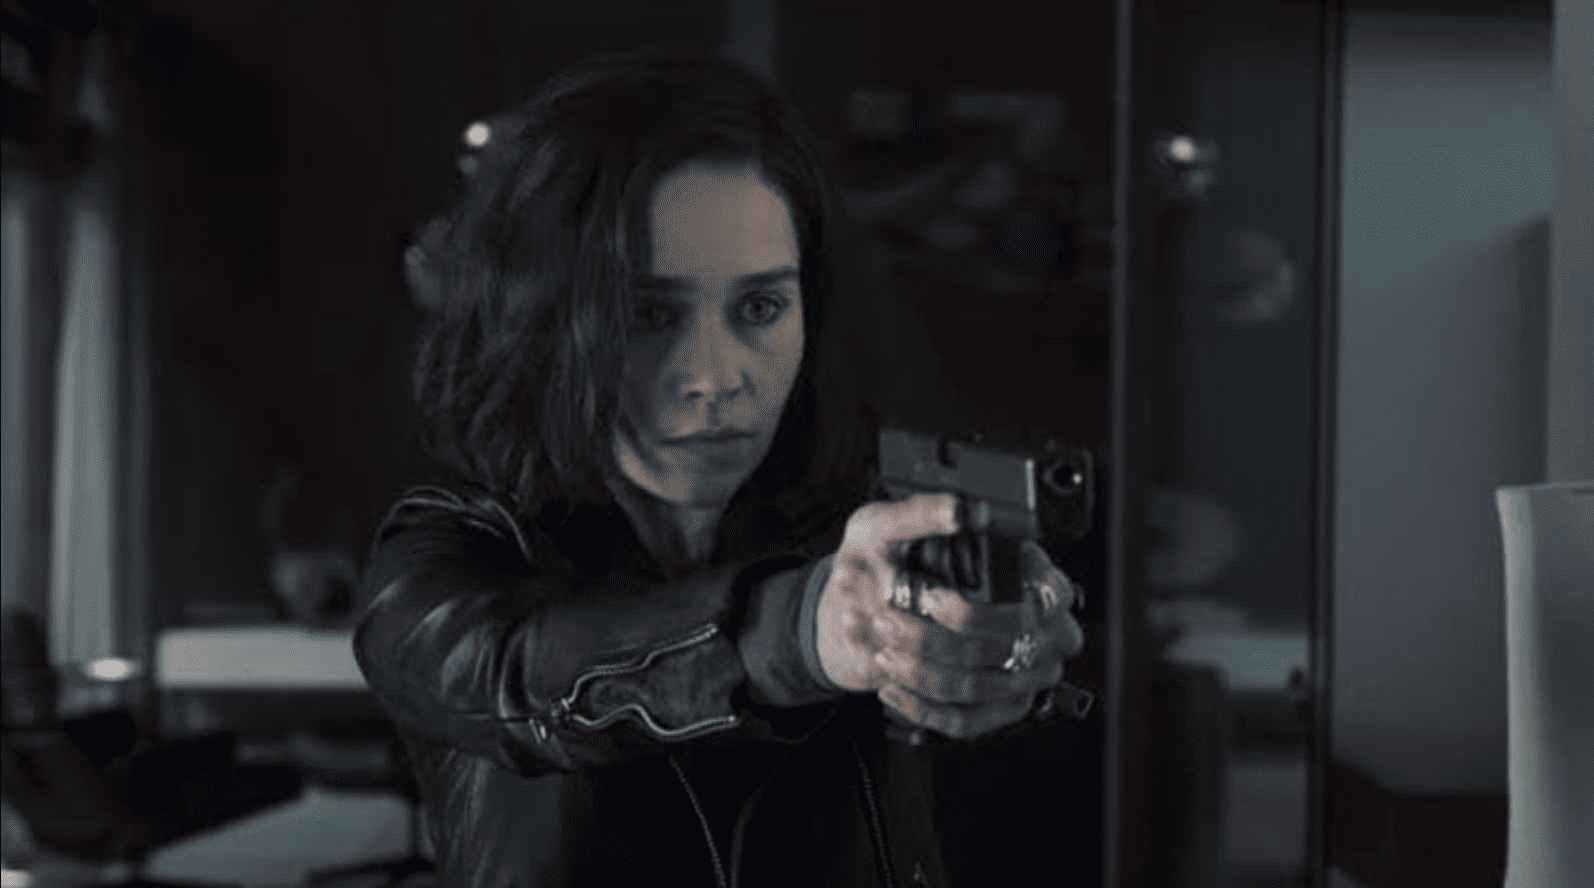 A woman in a leather jacket points a gun at someone off-screen in this image from Marvel Studios.